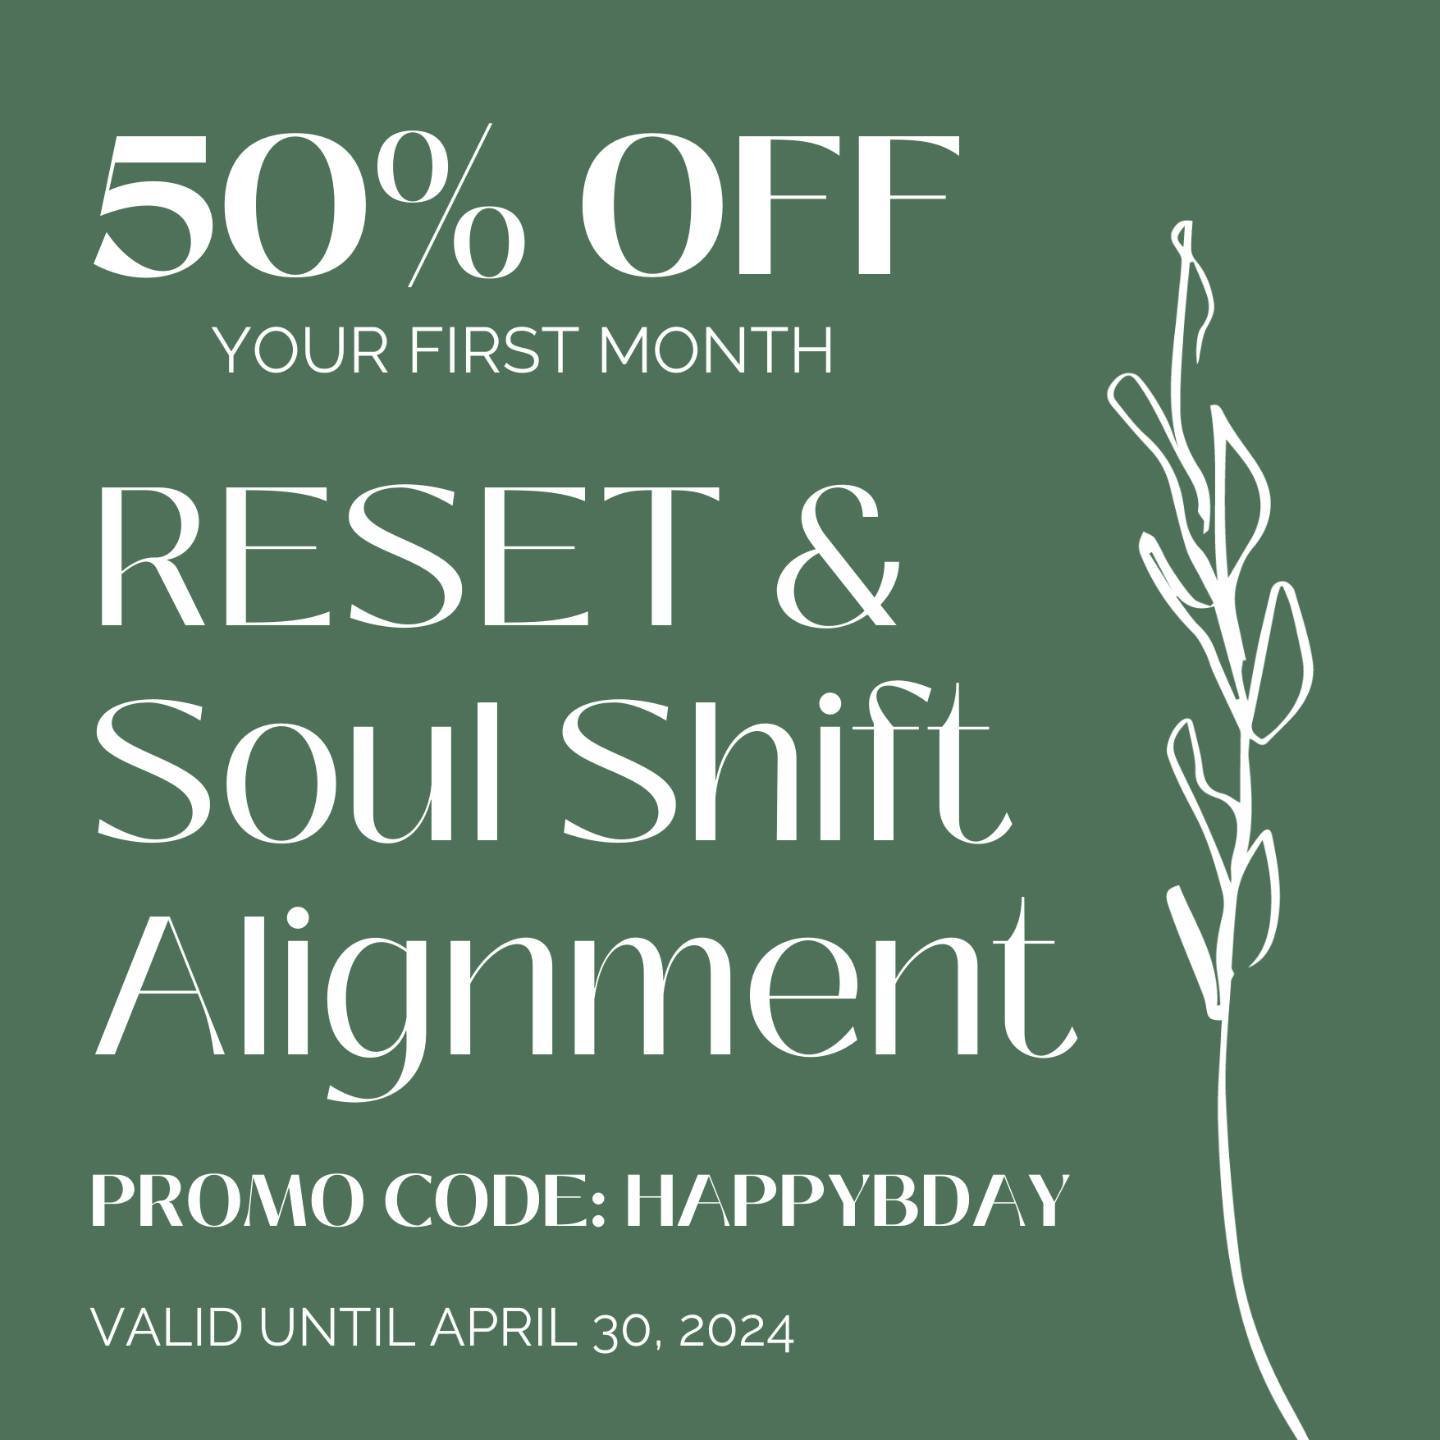 ⭐️ LAST CHANCE ⭐️ It's Dr. Liz's birthday month, but YOU get a gift. Use code &quot;HAPPYBDAY&quot; for 50% off of your first month of RESET or Soul Shift Alignment! 🎁
.
Link in bio to join. Offer expires 4/30/24. Valid for new members only.
.
.
.
#